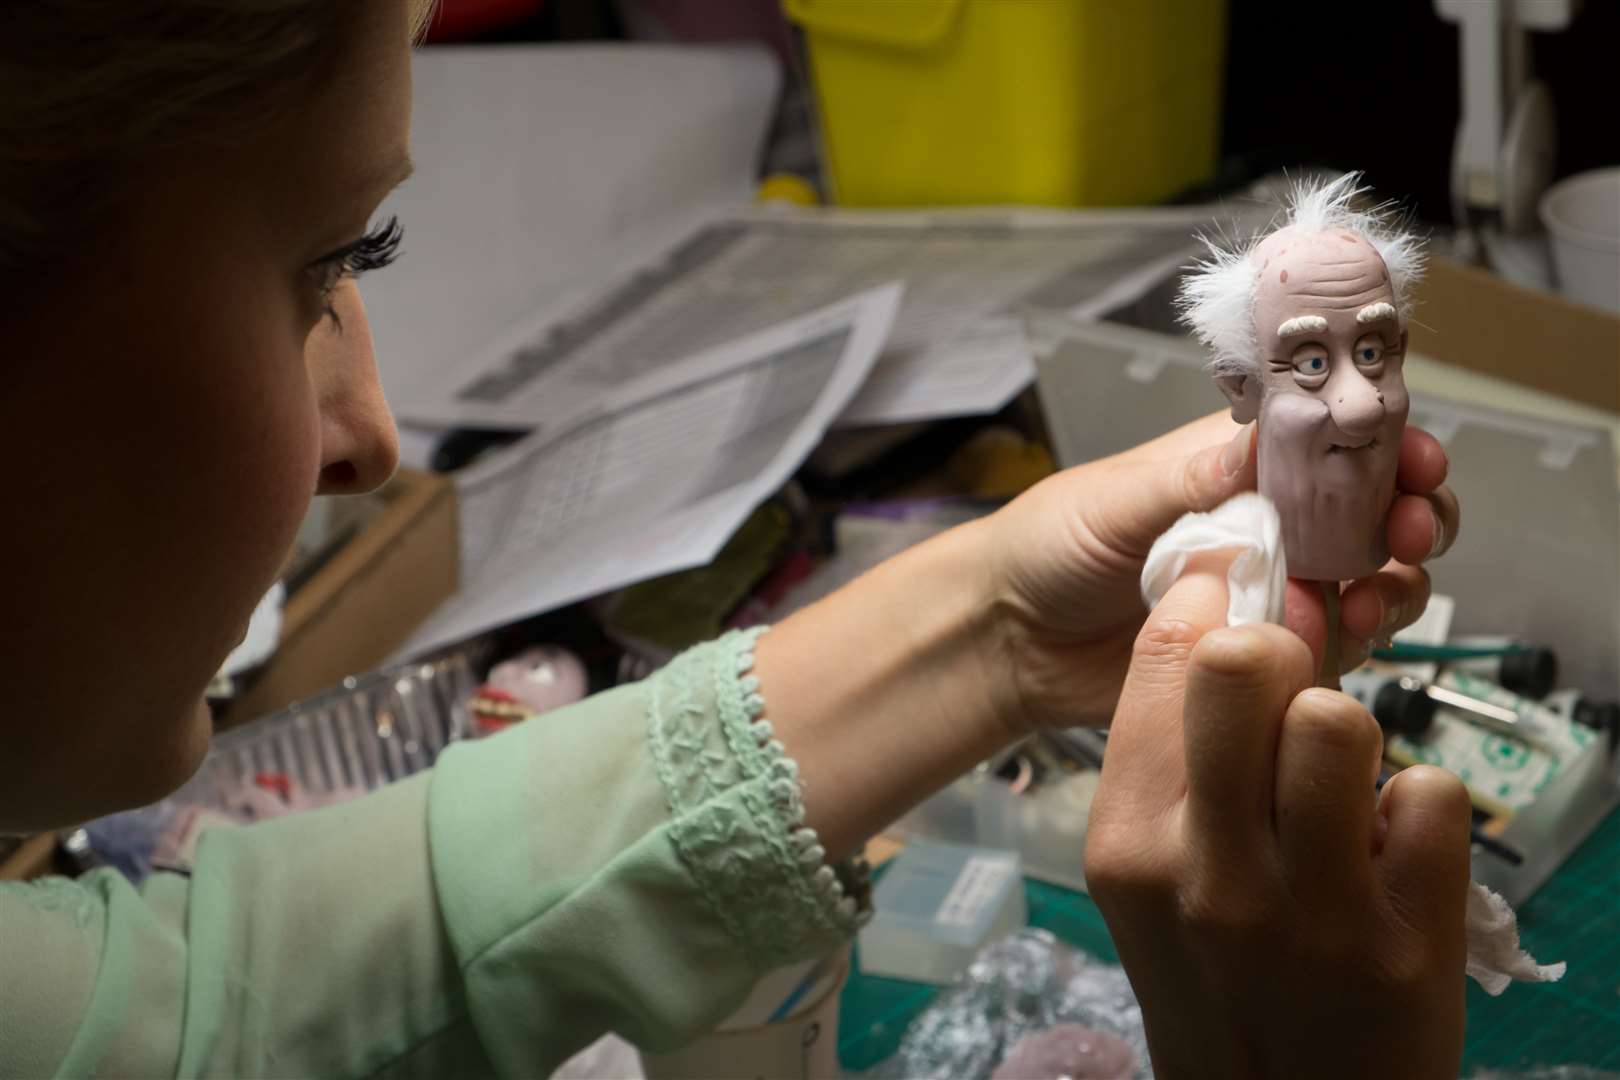 Emma blends the mouth of an old man puppet while working on Shaun the Sheep the Movie